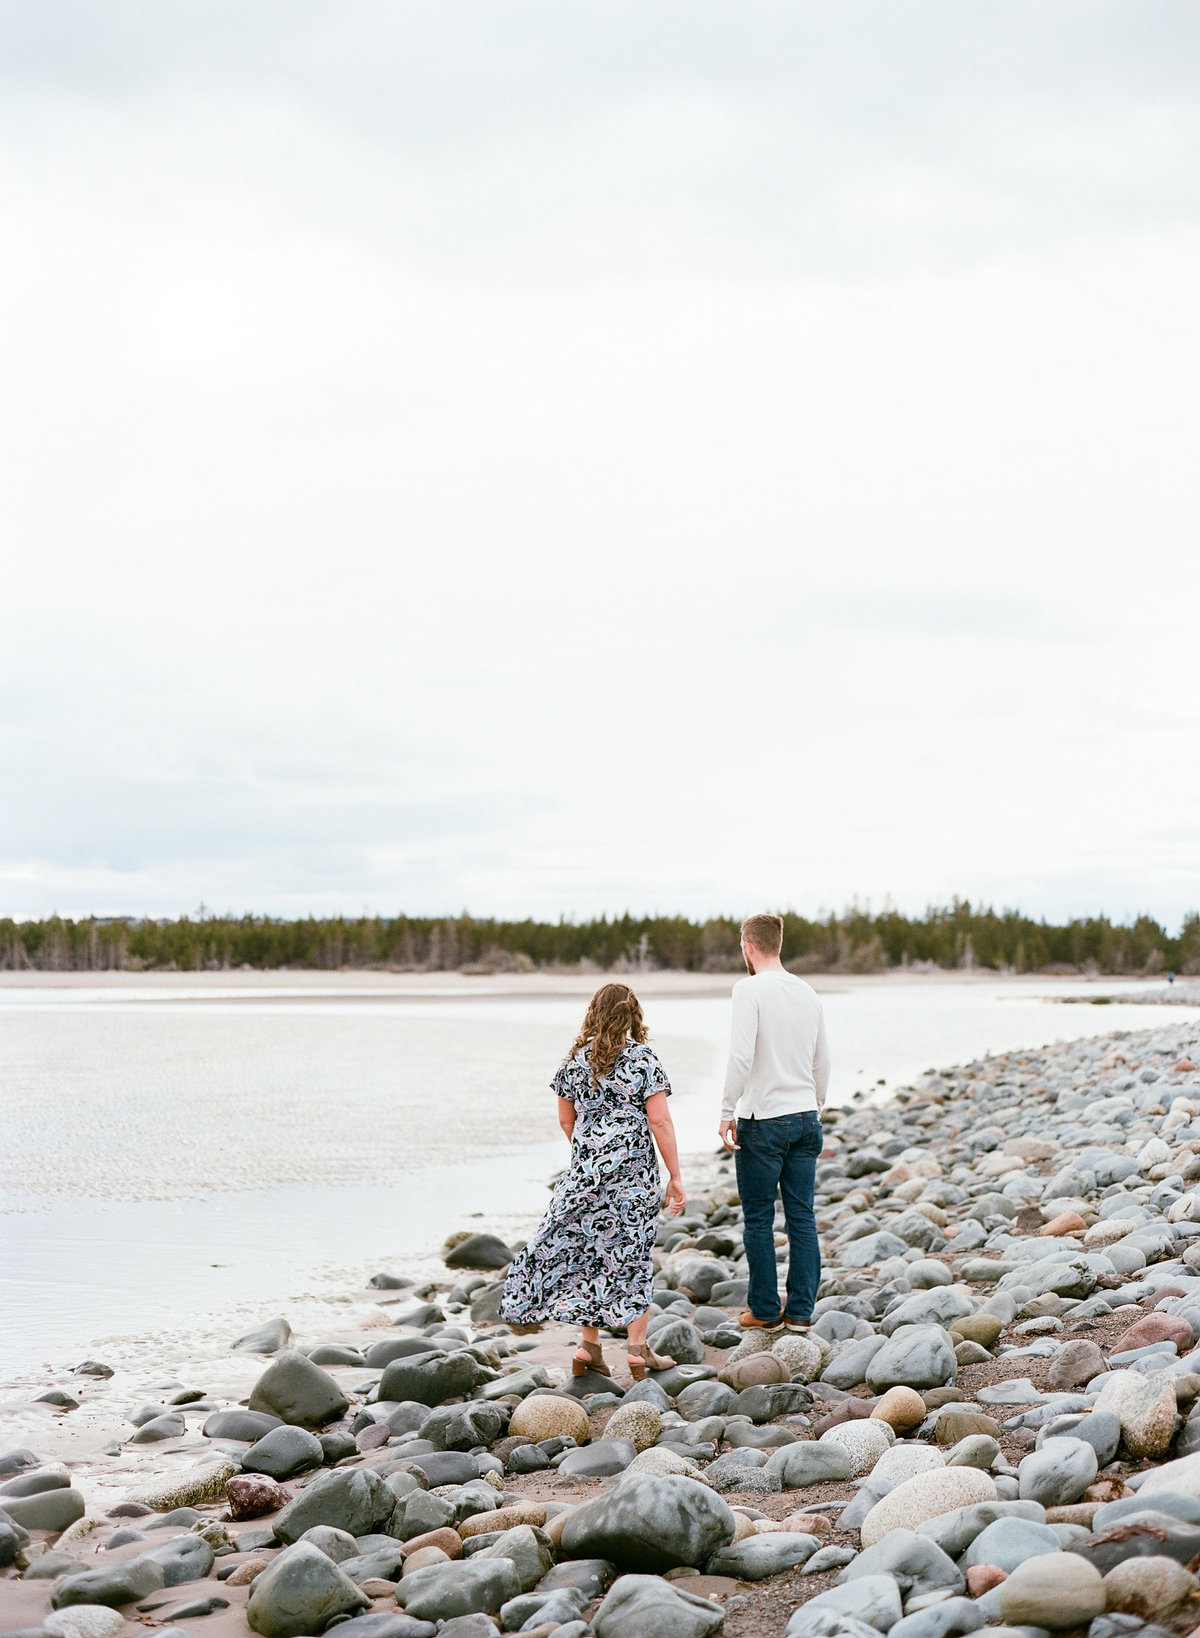 Jacqueline Anne Photography - Akayla and Andrew - Lawrencetown Beach-10